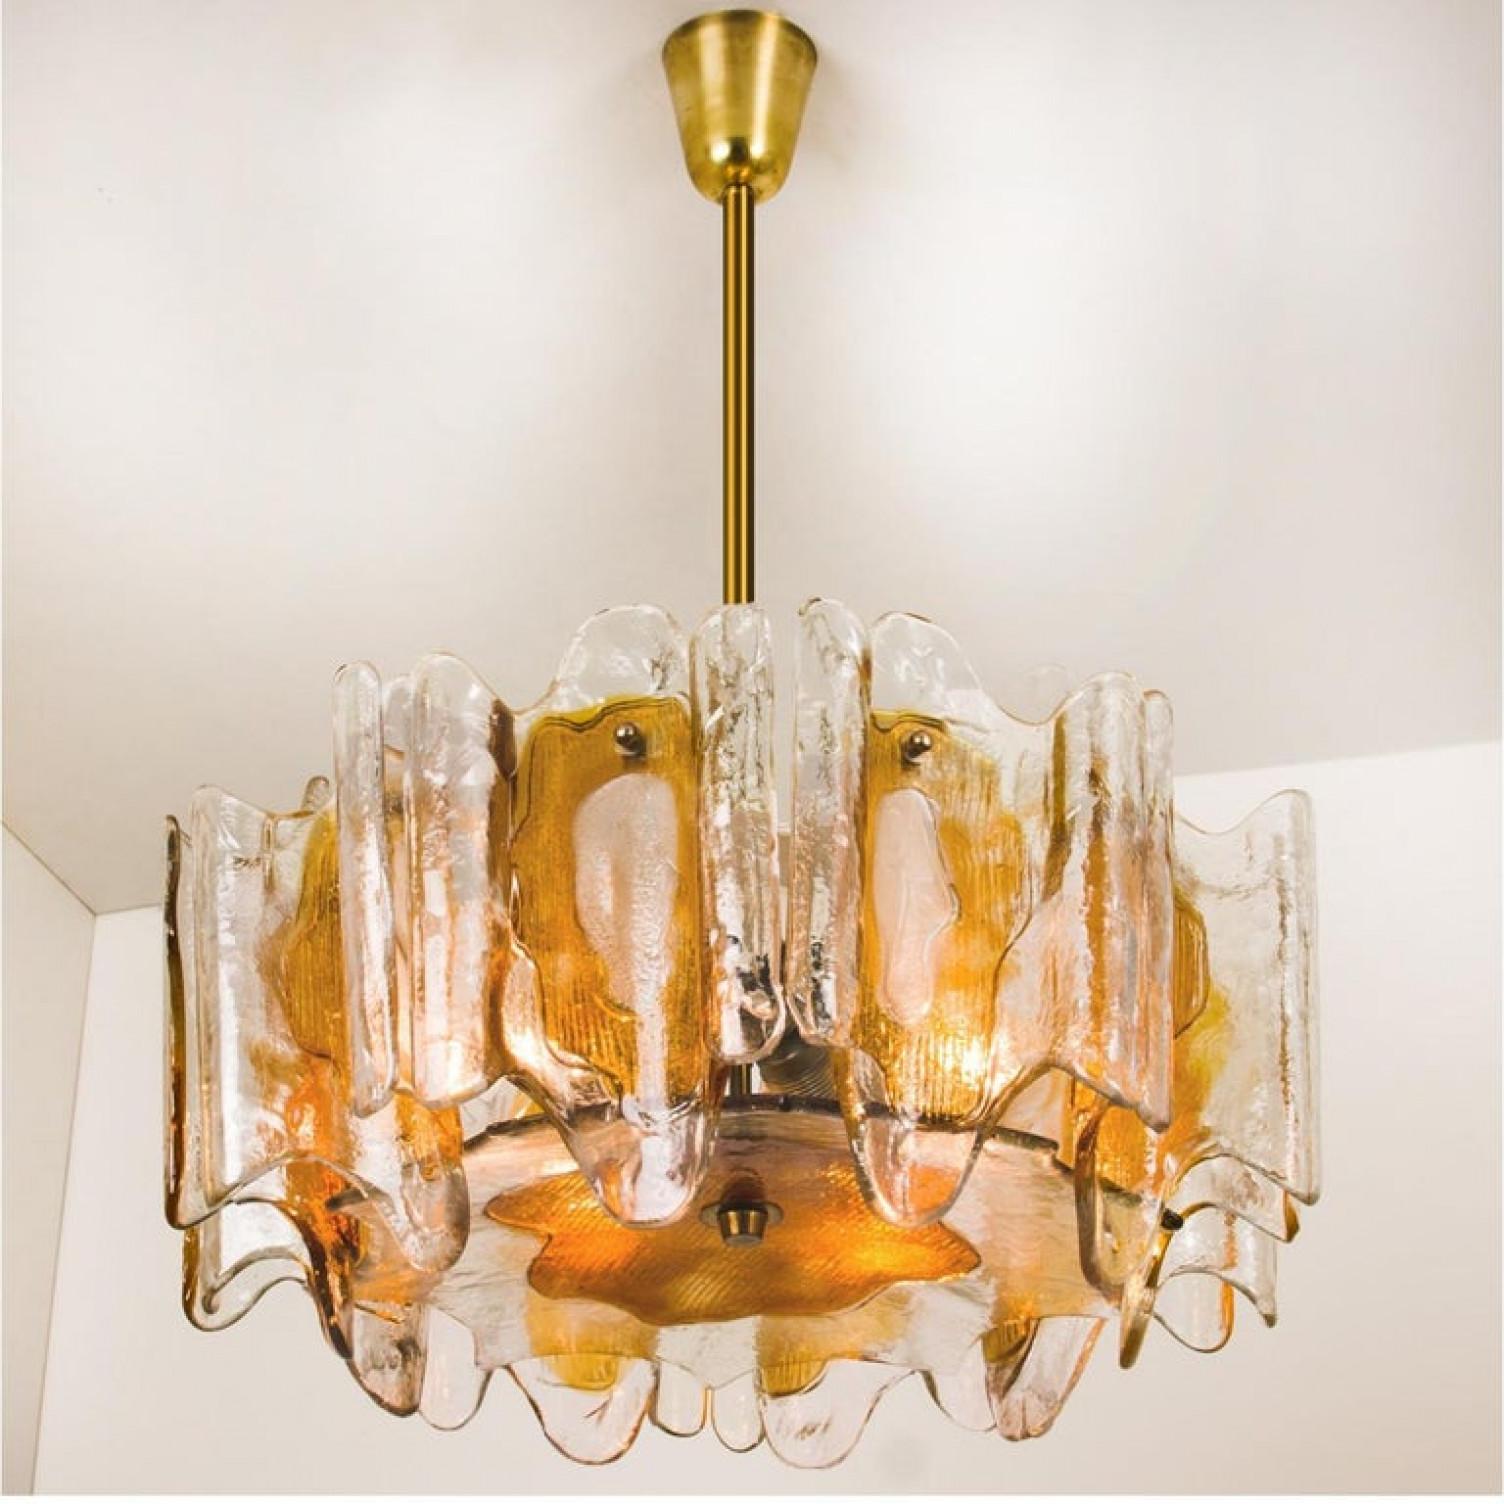 20th Century 3-Light Fixtures by J.T. Kalmar, Crystal Glass, 1 Chandelier and 2 Wall Lights For Sale